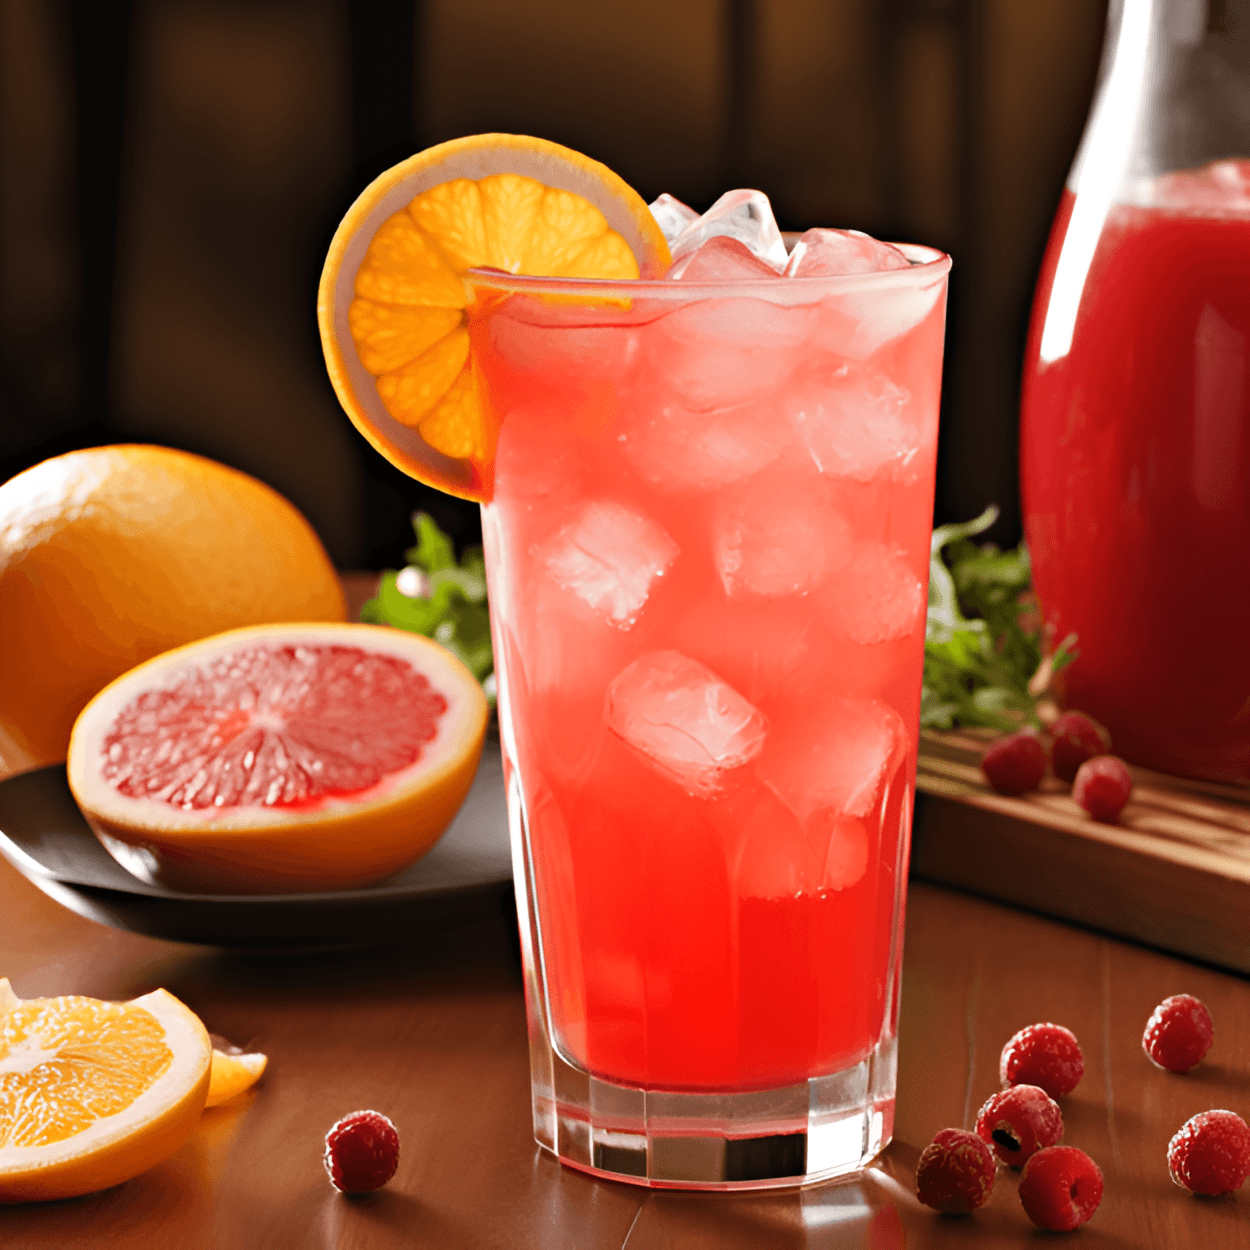 Pink Motorcycle Cocktail Recipe - The Pink Motorcycle is a sweet, fruity cocktail with a hint of tartness. The combination of peach schnapps, cranberry juice, and orange juice creates a refreshing, tangy flavor. The vodka adds a bit of kick, making it a well-balanced, delightful drink.